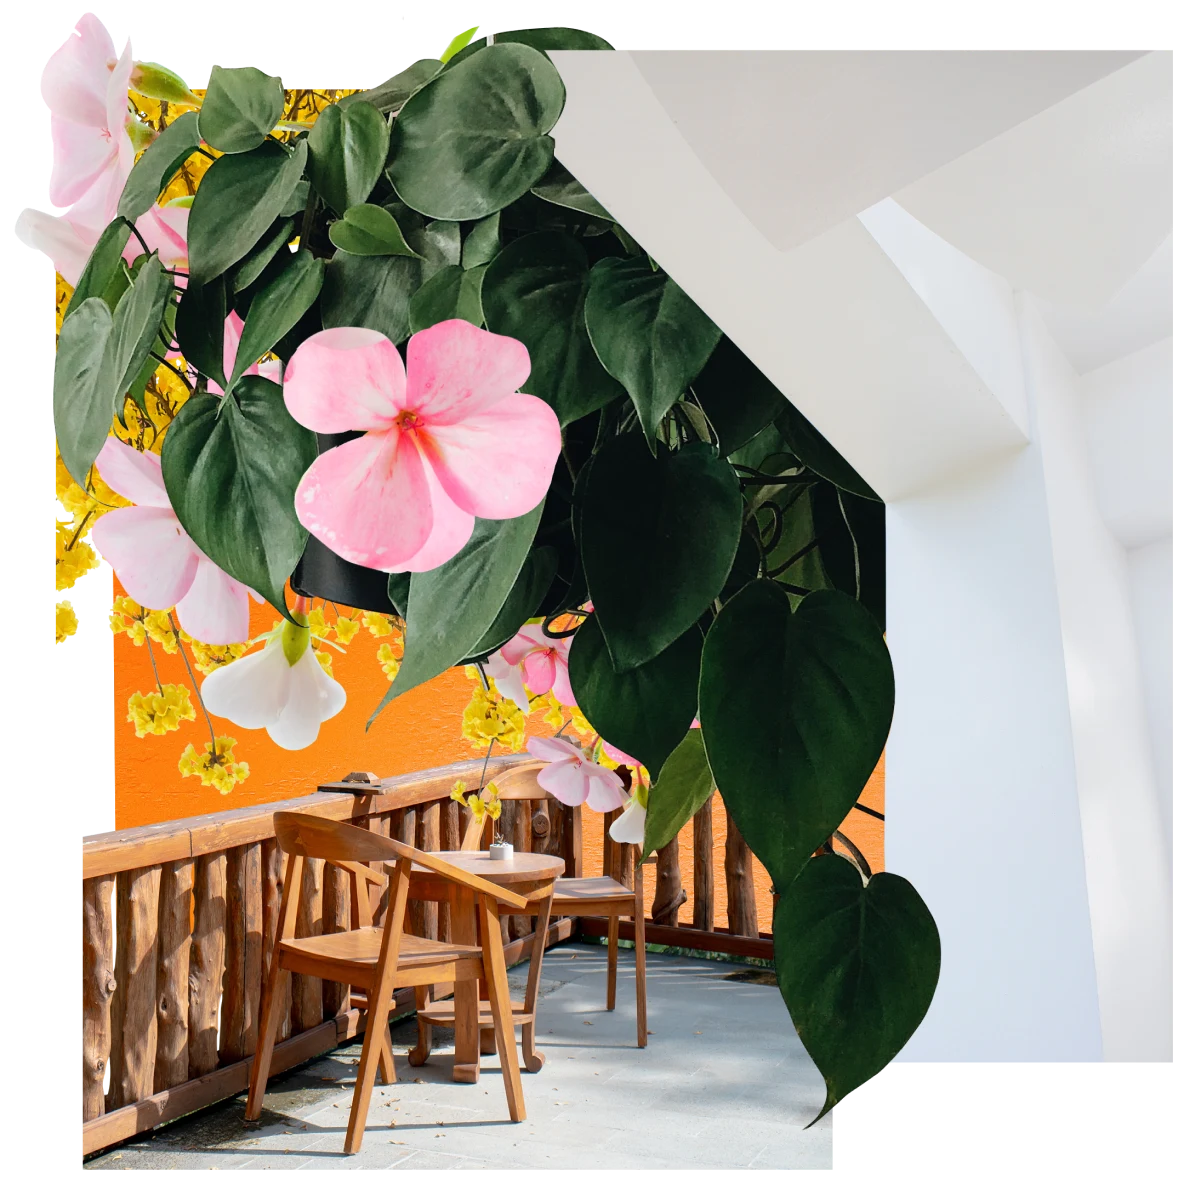 Collage of green, brown, yellow and white items. Green leaves flowing down from a ceiling in the centre, interwoven with pink and yellow flowers. Underneath, a white staircase on the right. Two wooden chairs and a round table on outdoor patio in the foreground.